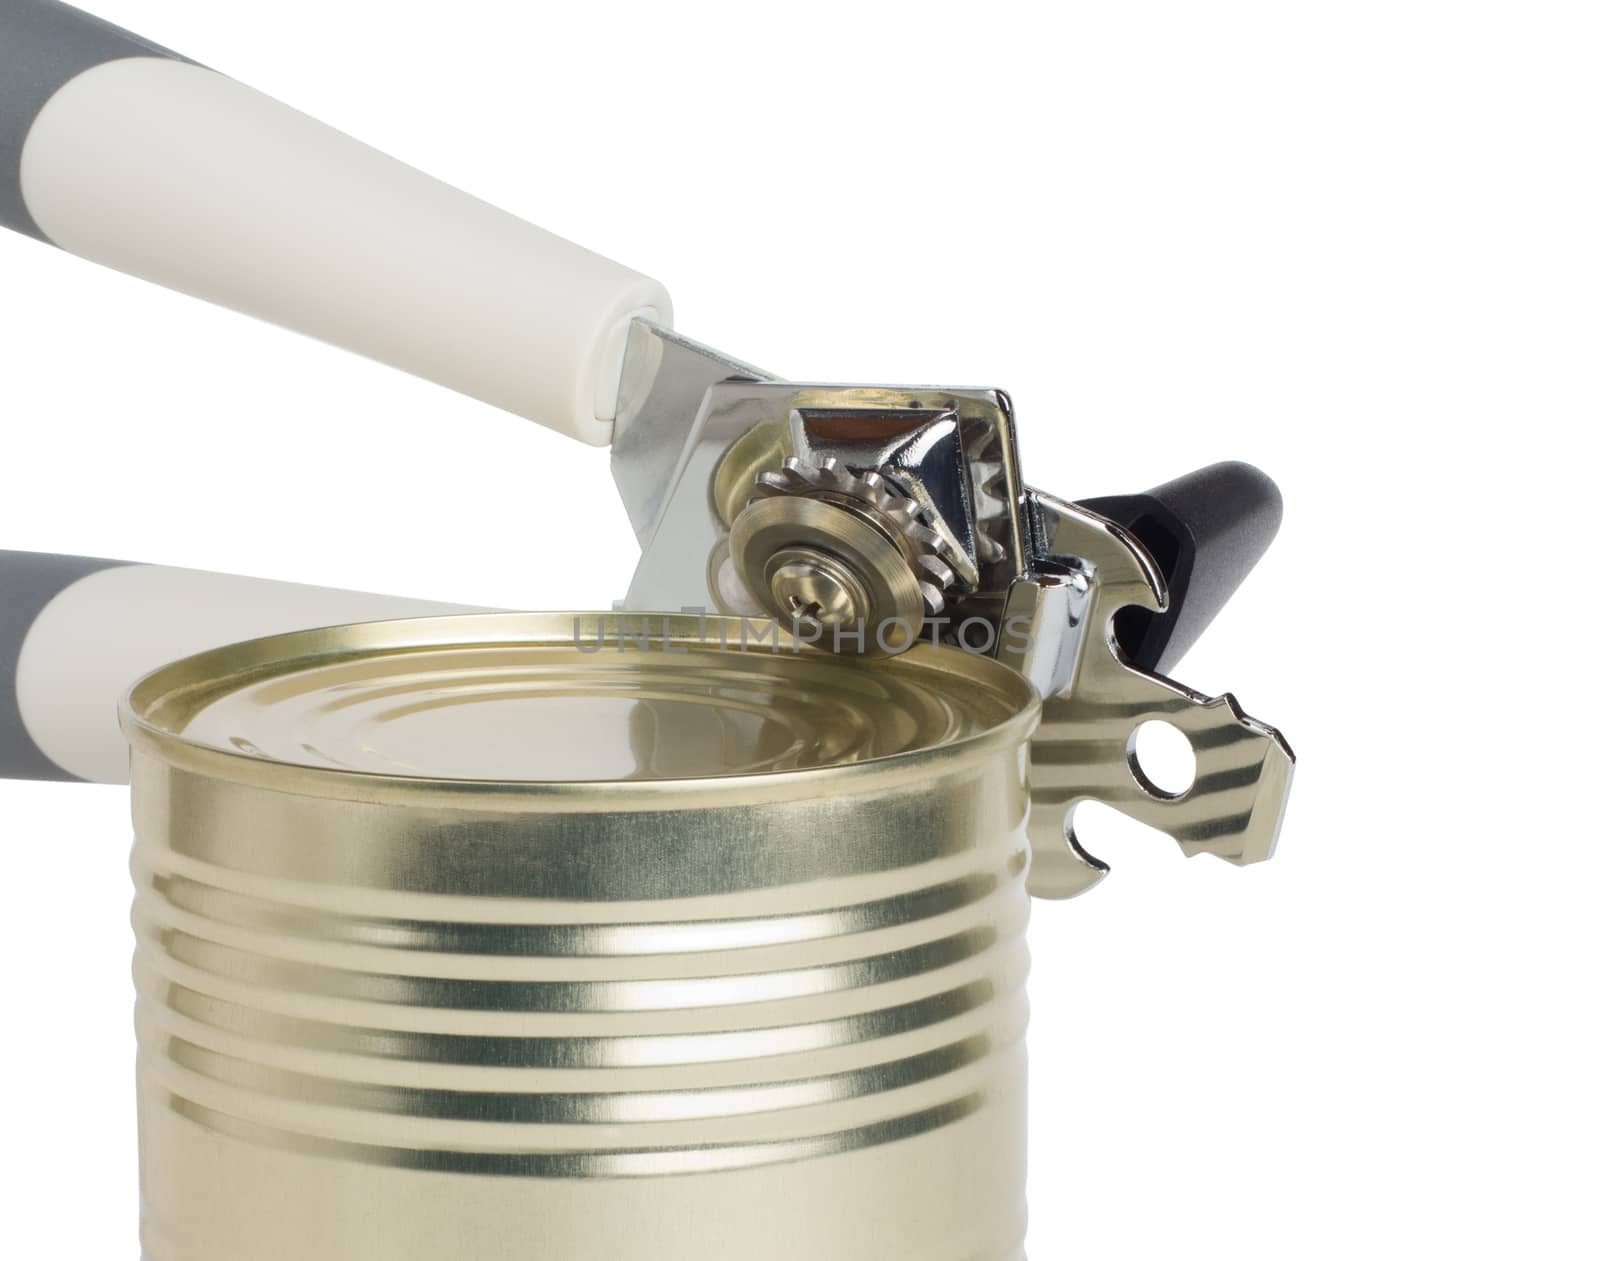 close up of the can opener by ozaiachin